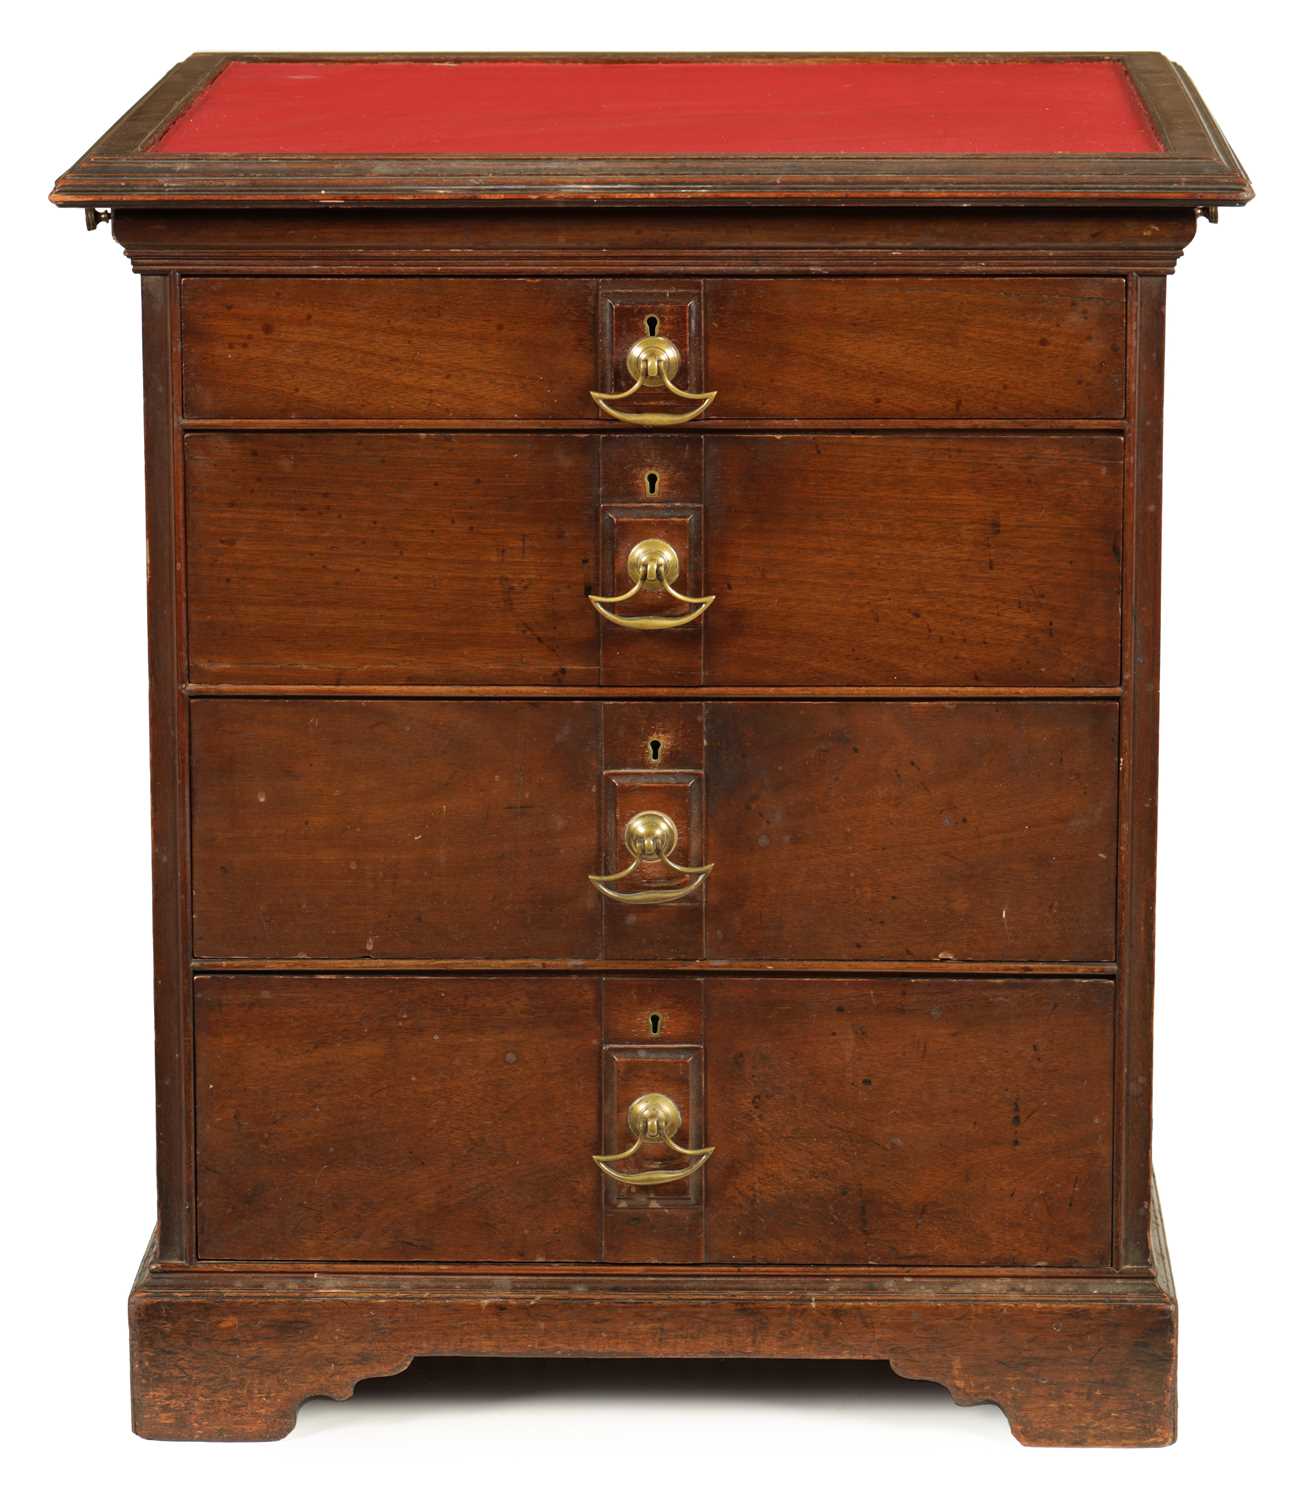 AN UNUSUAL LATE 19TH CENTURY WALNUT SMALL CHEST OF DRAWERS BY E. WALKER CABINETMAKER AND DATED 1893